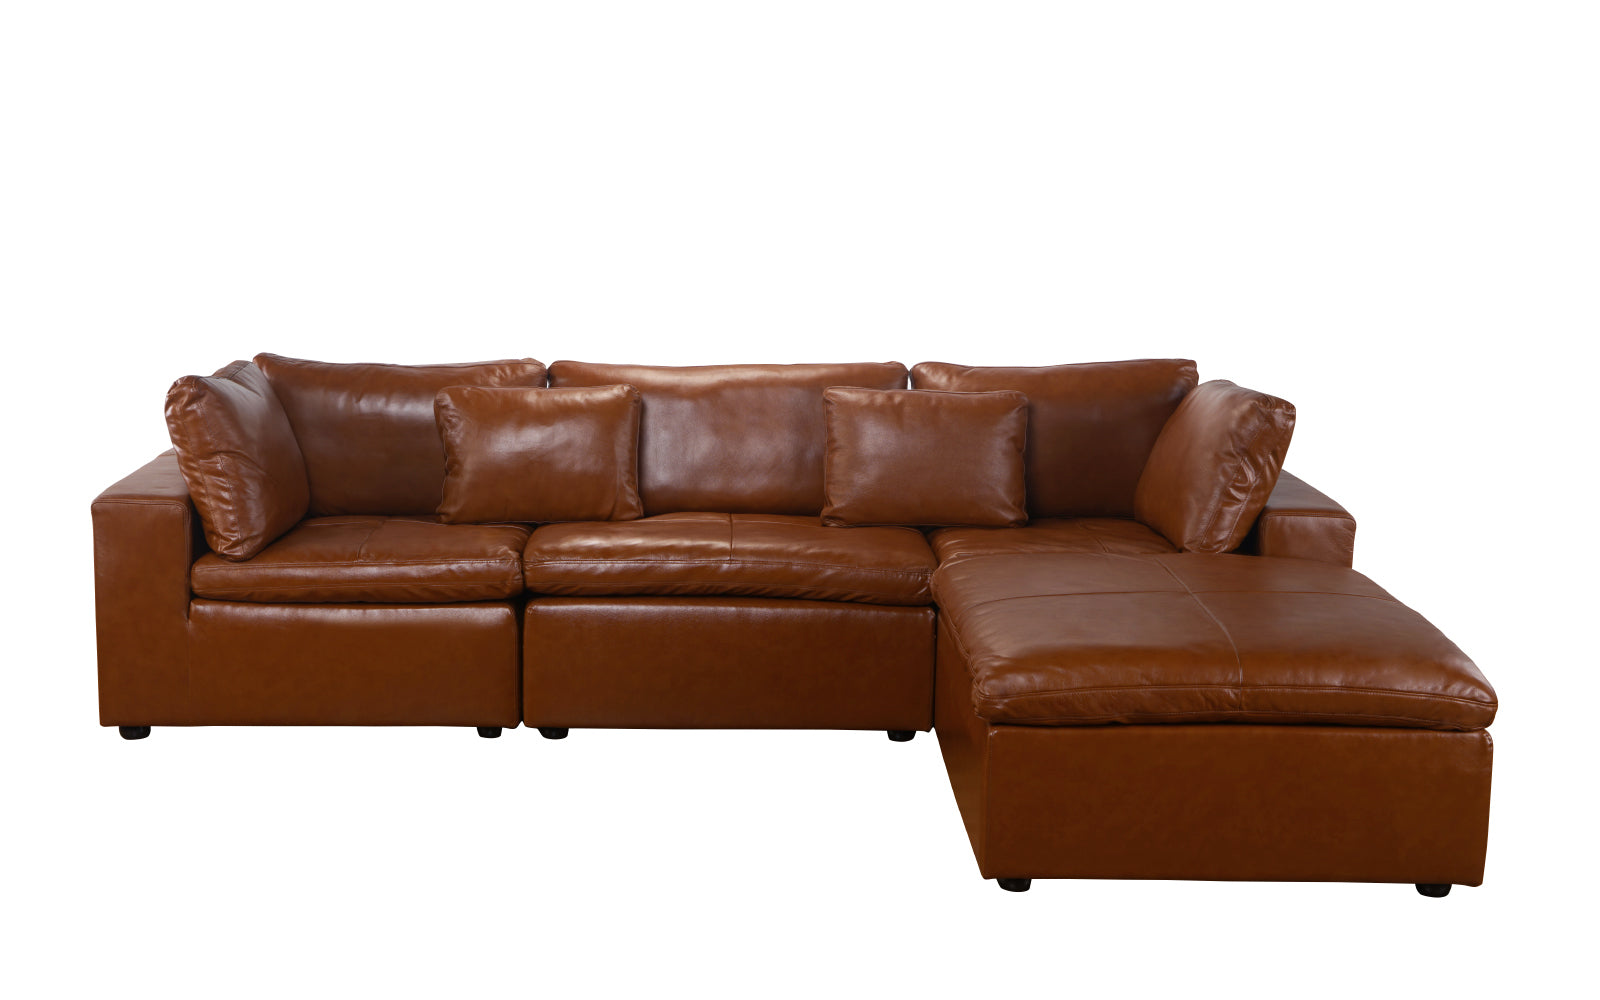 Sigur Modern Leather Match Sectional Sofa with Chaise ...